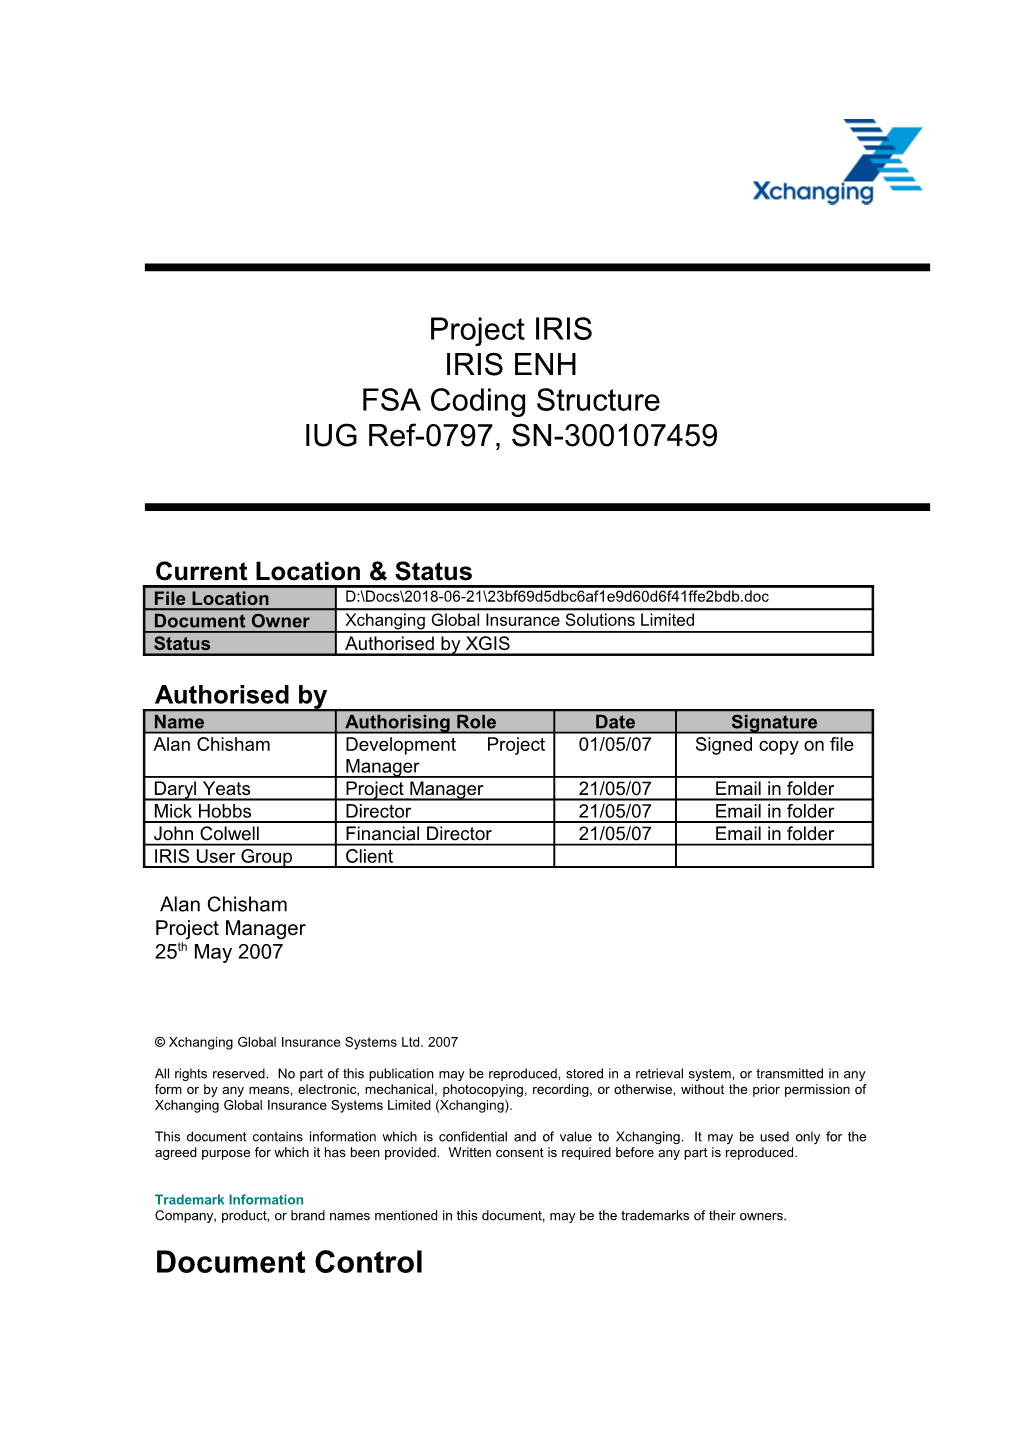 300107459-New FSA Coding Structure (Functional Specification)